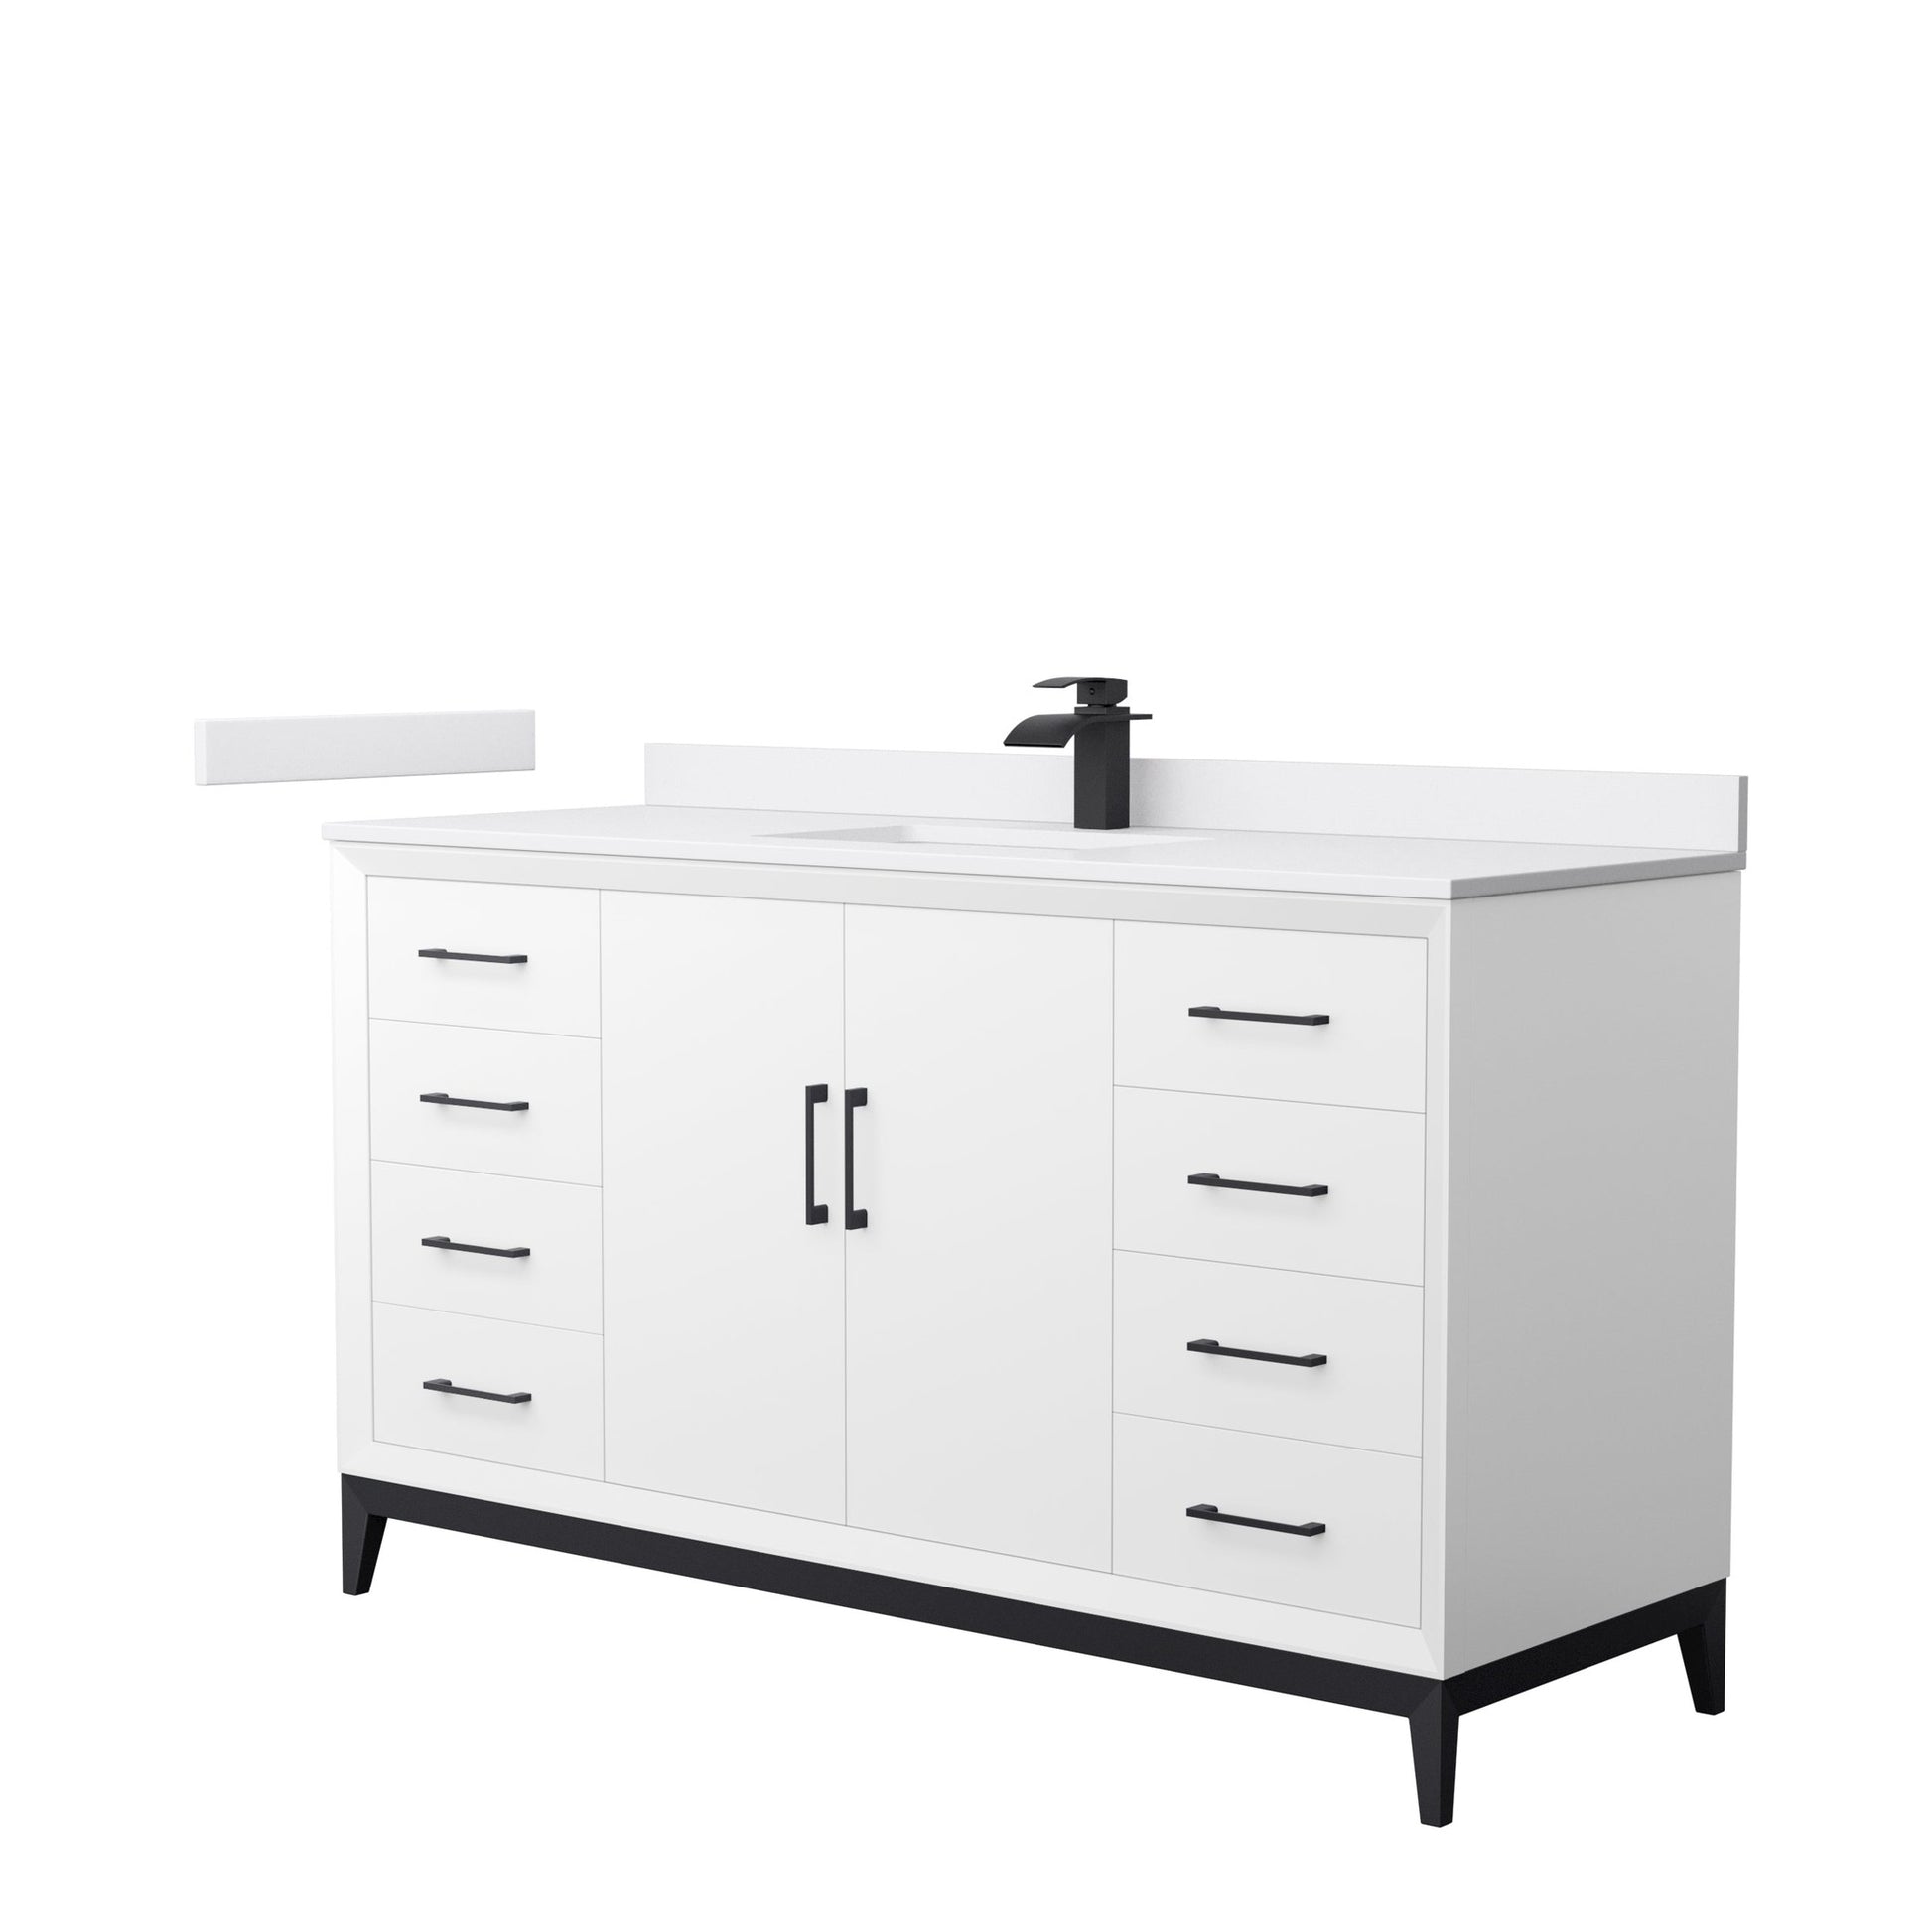 Wyndham Collection Amici 60" Single Bathroom Vanity in White, White Cultured Marble Countertop, Undermount Square Sink, Matte Black Trim